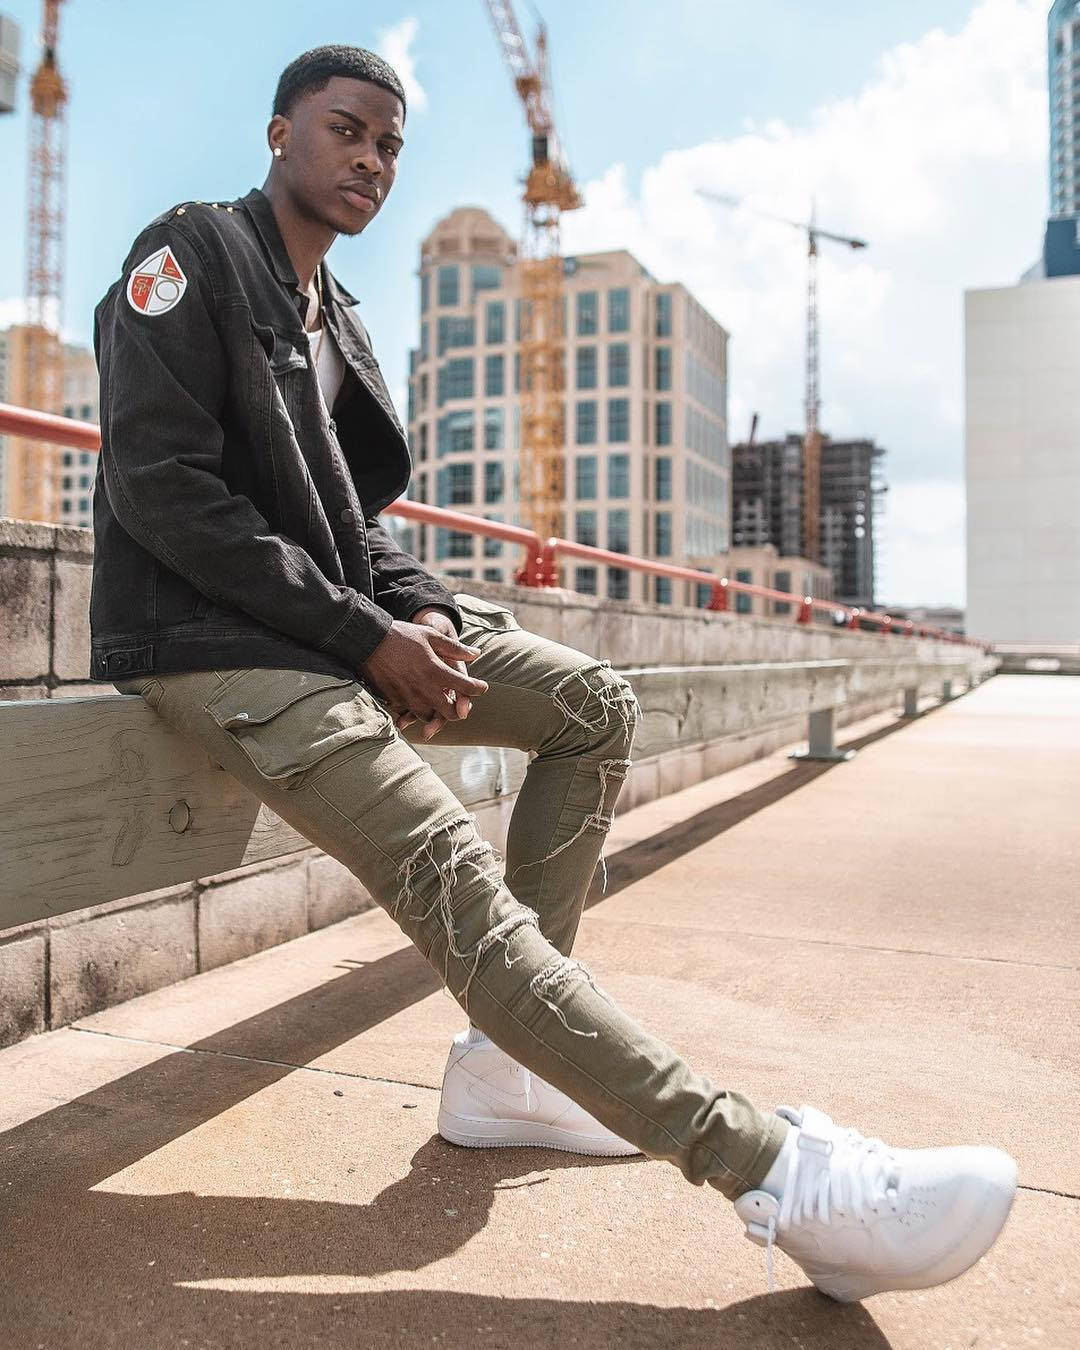 "American Instagram star, Swavy, Enjoying the City Views from the Rooftop" Wallpaper